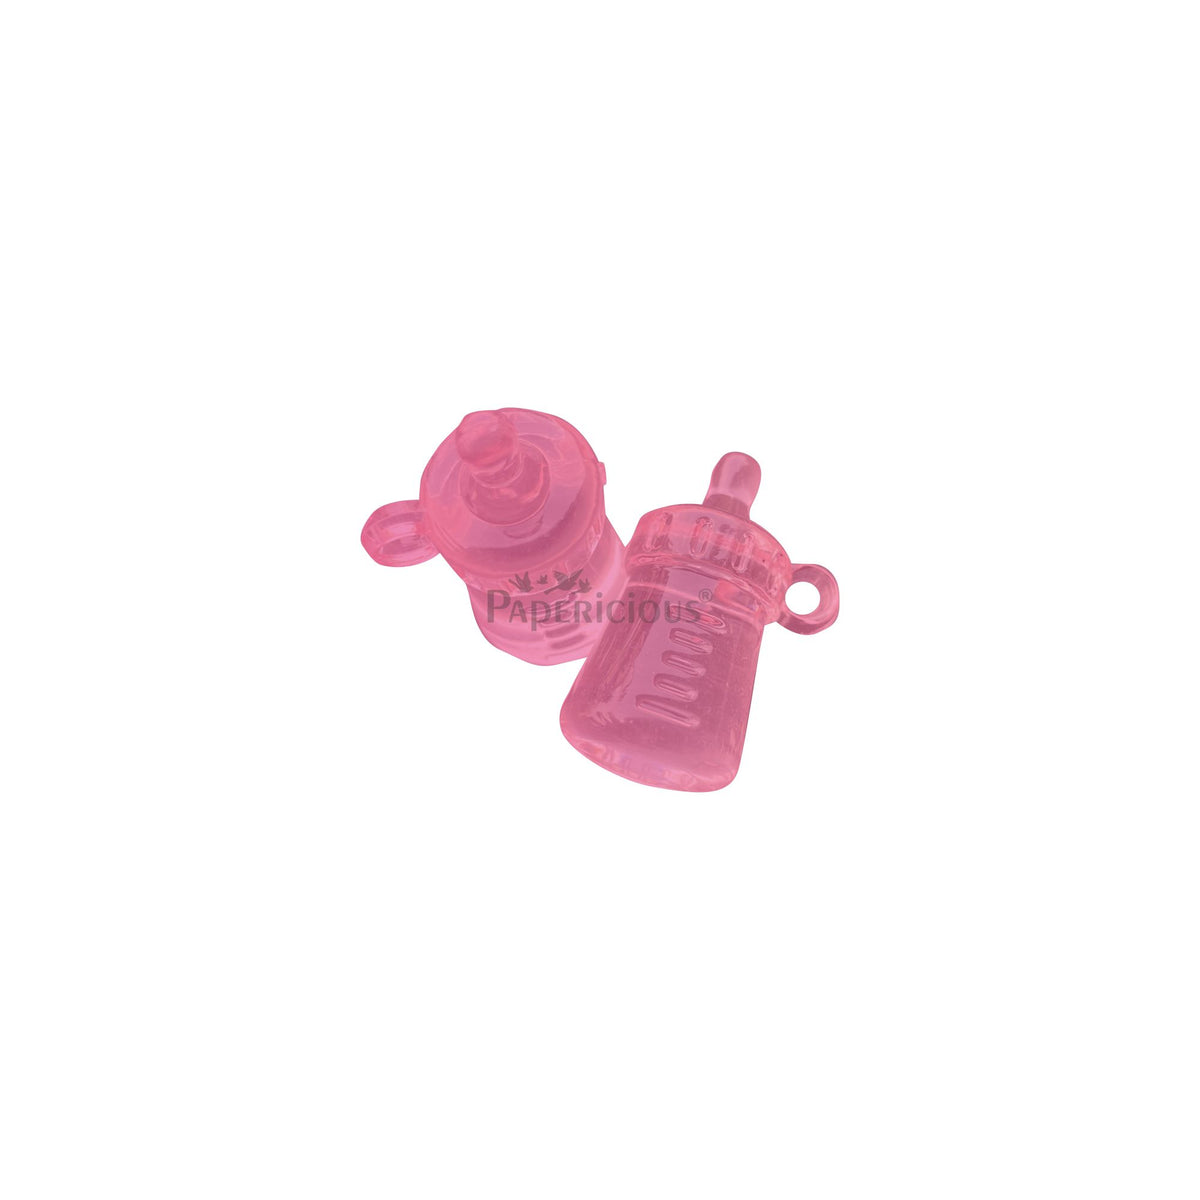 PAPERICIOUS - Baby Girl Bottle Embellishment - Ready to Use - 2 Pc